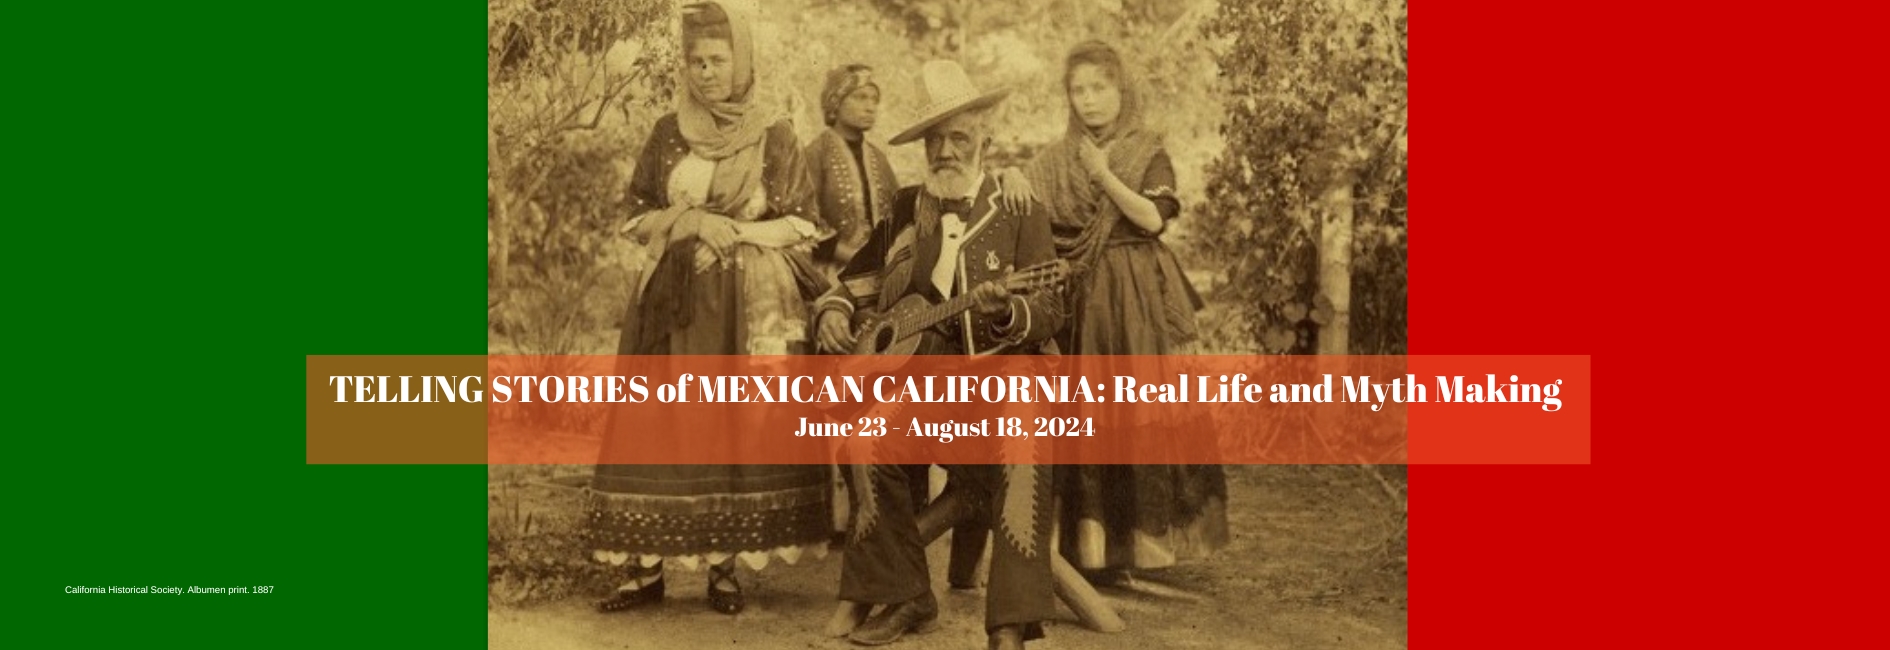 Historical image of mexican family with red and green blocks on the edge